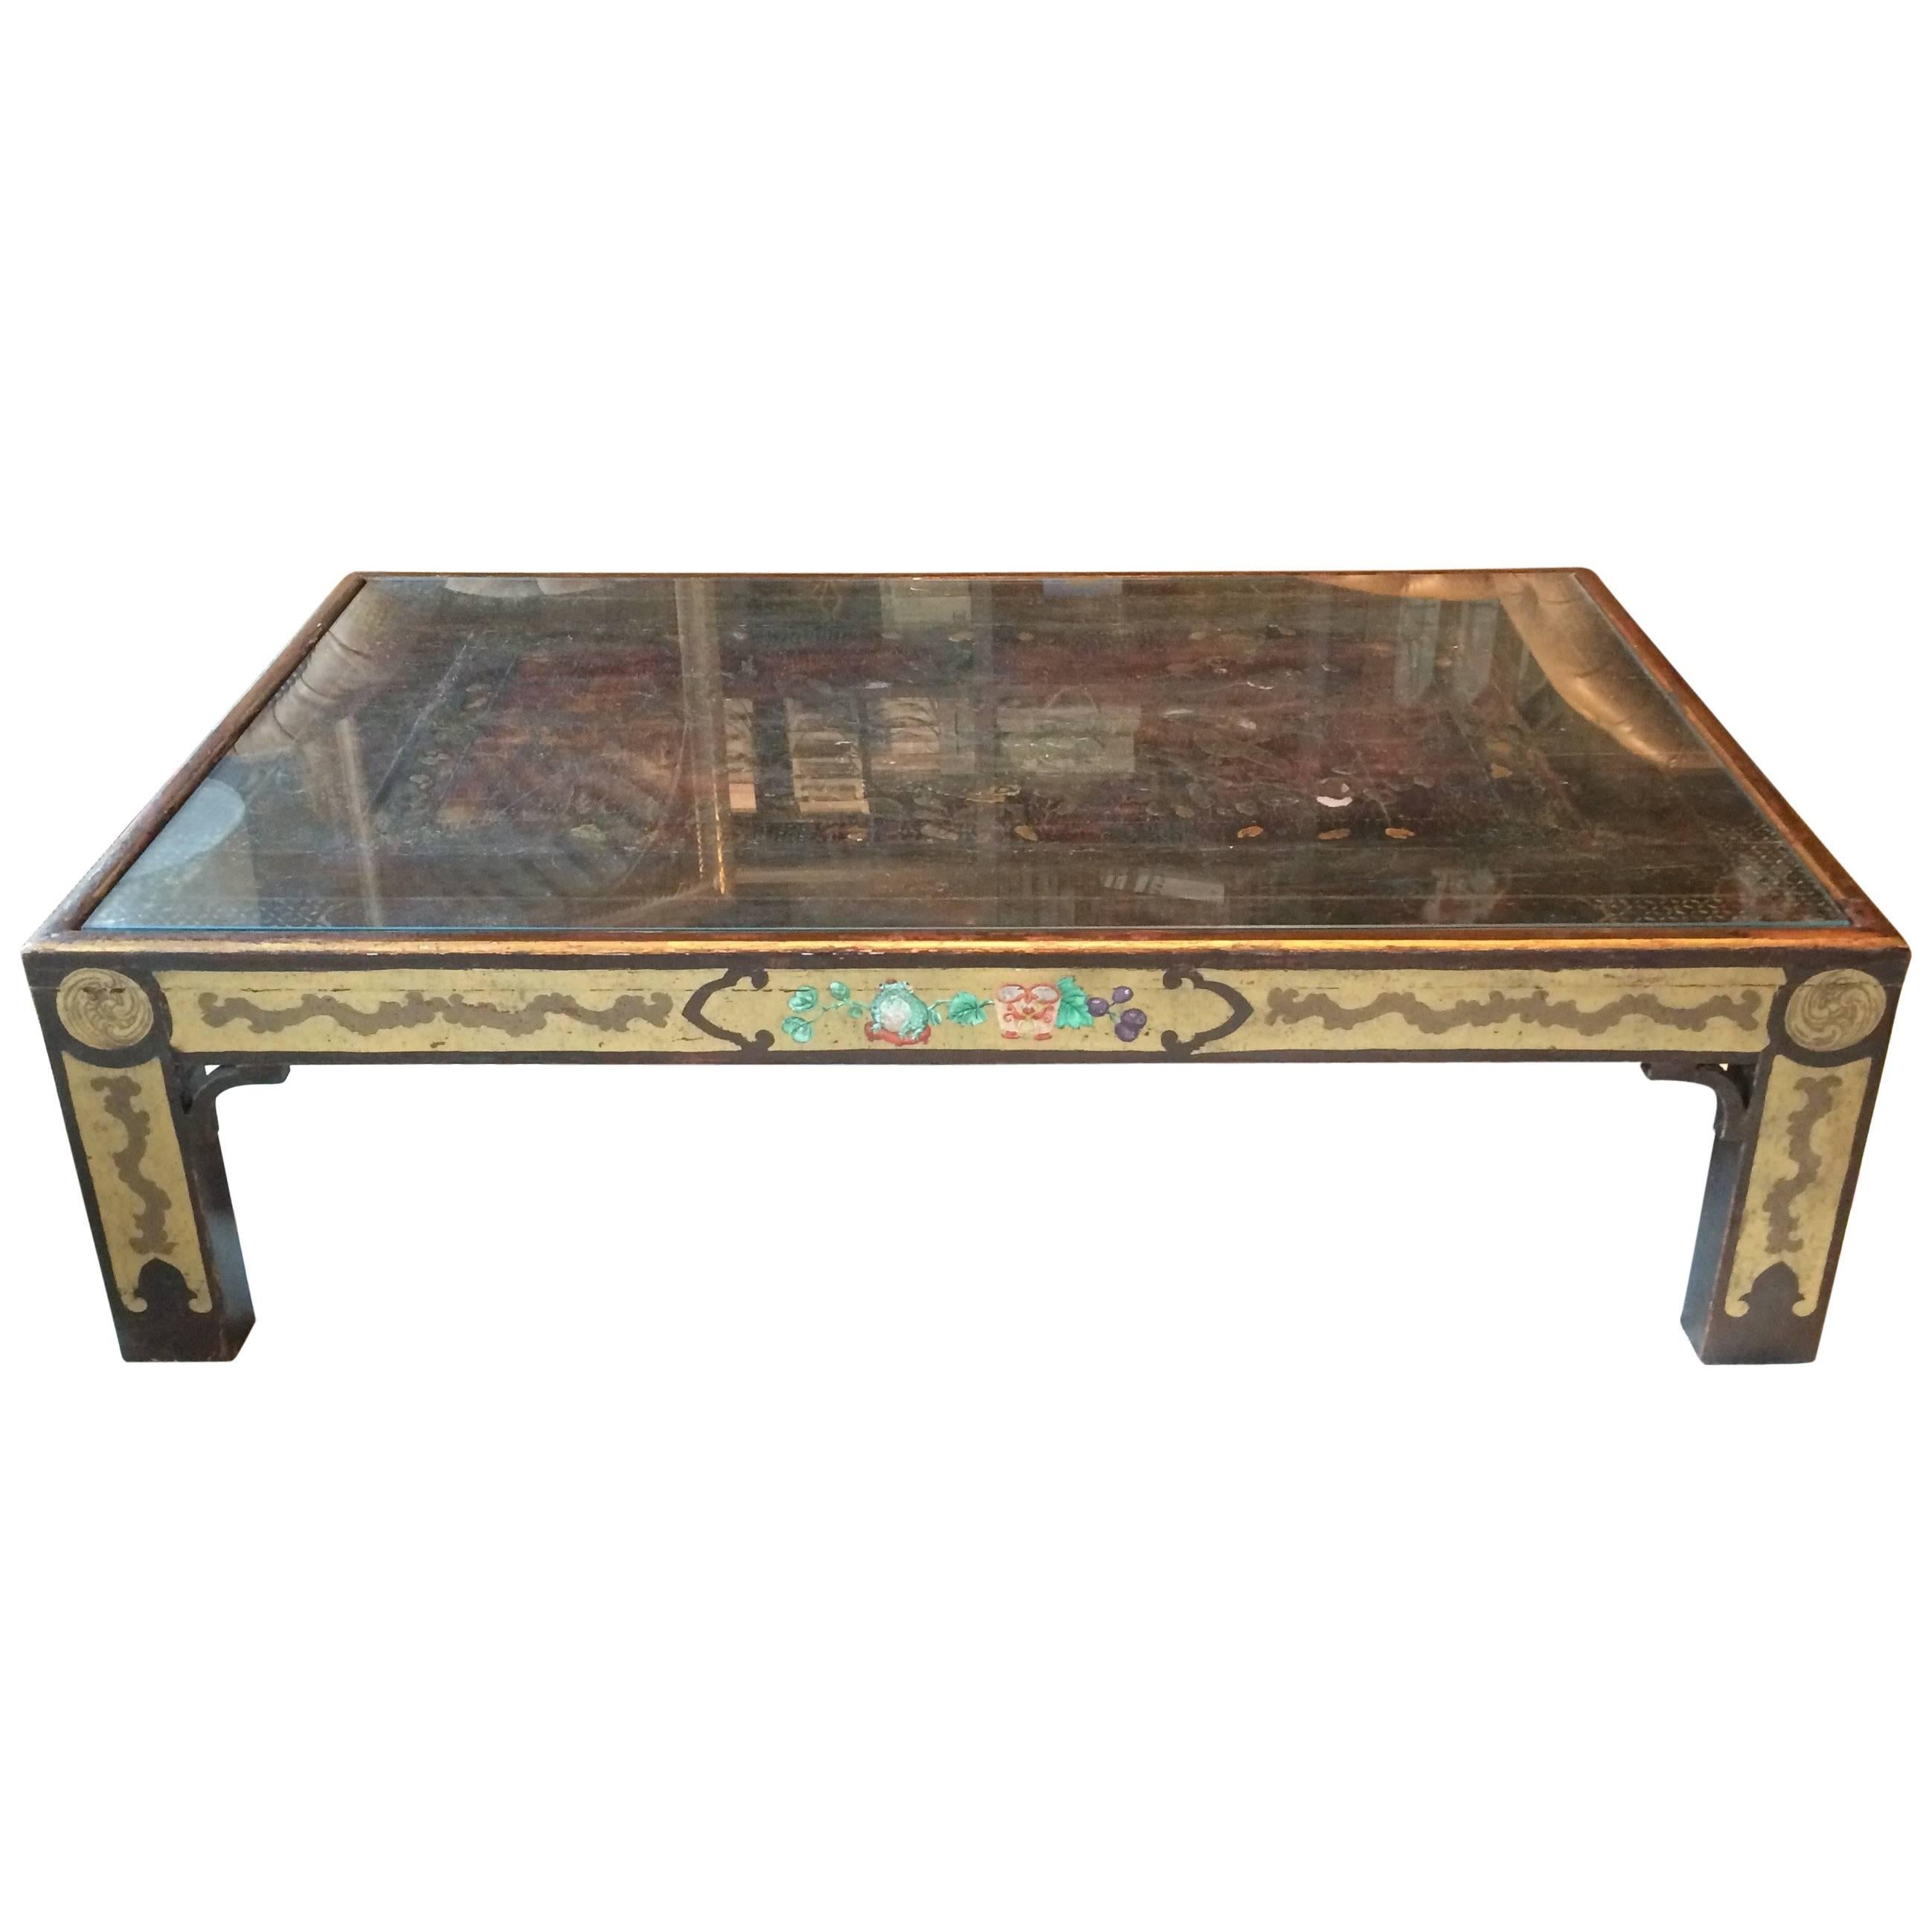 Impressive Polychrome Decorated Chinoiserie Style Monumental Coffee Table